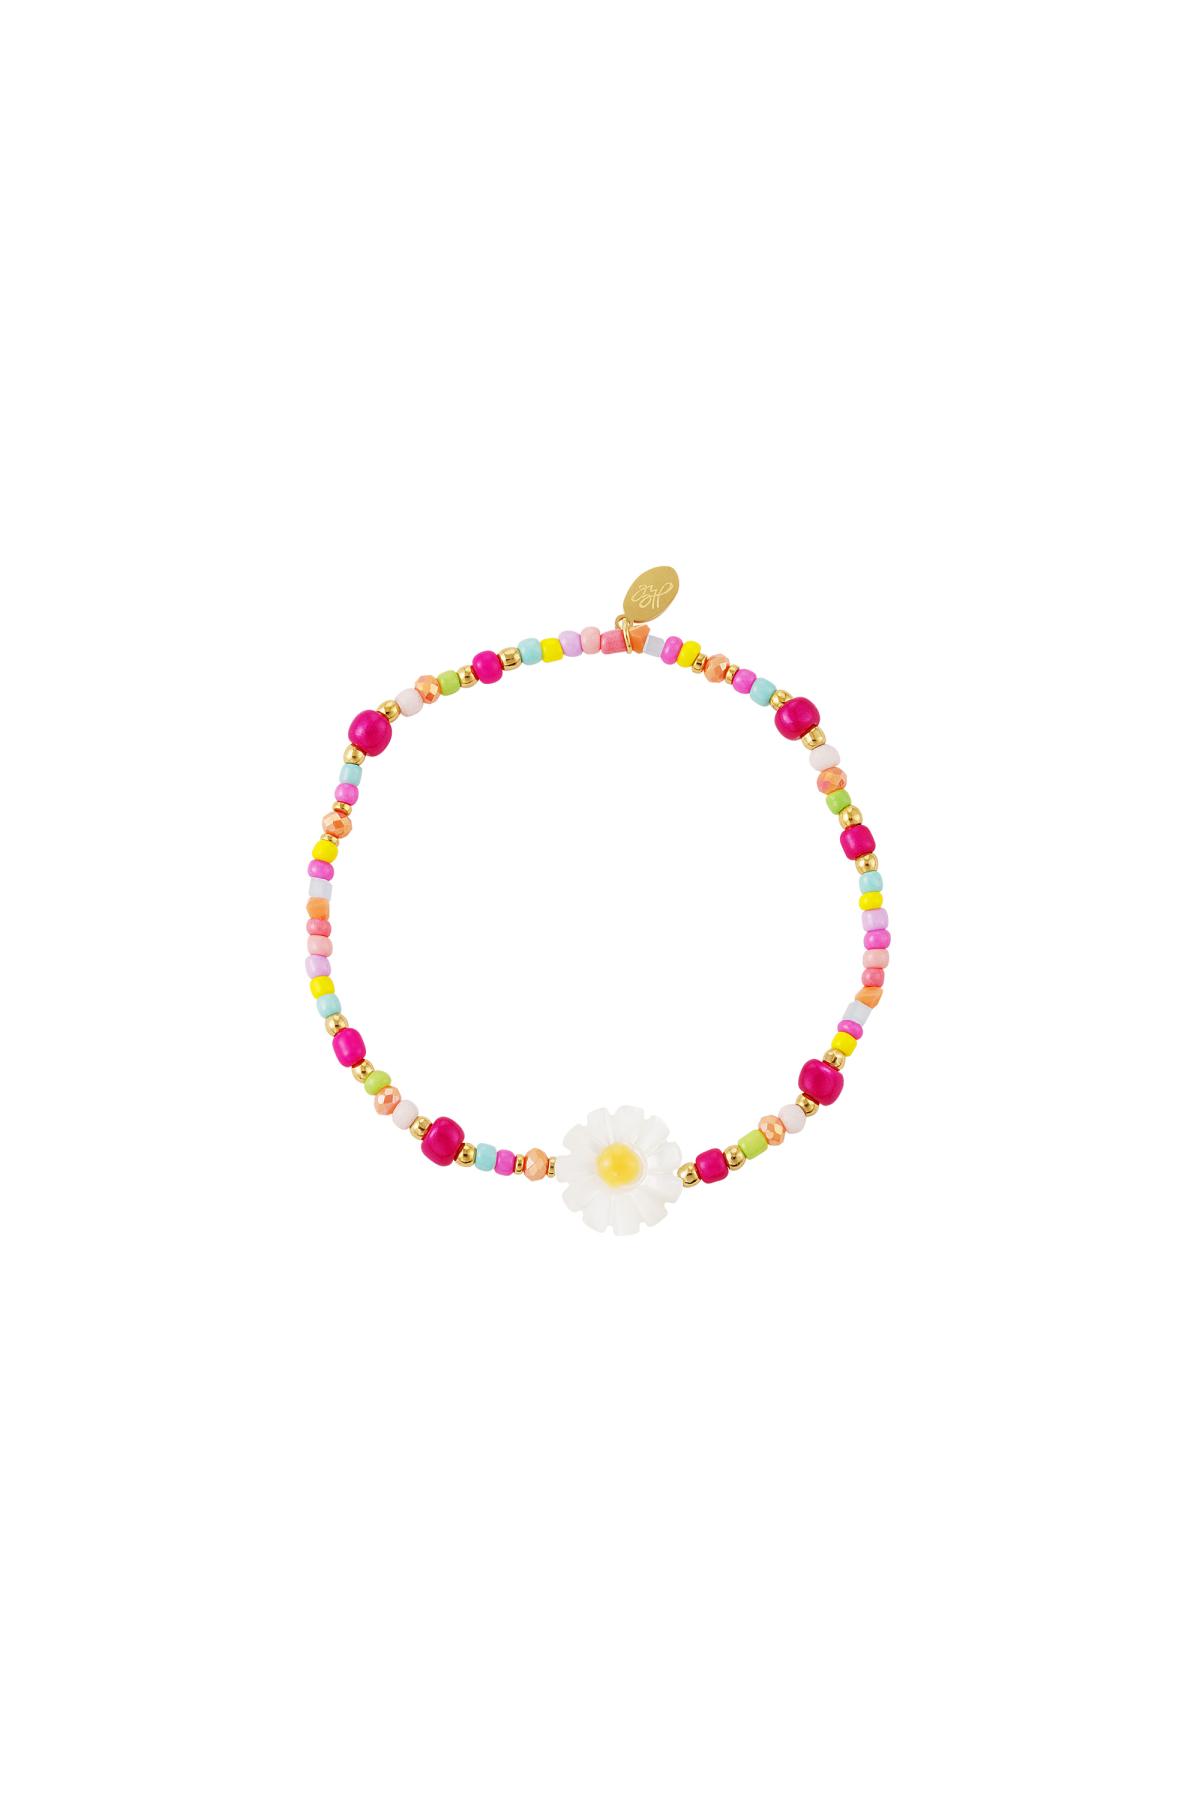 Colourful daisy bracelet - #summergirls collection Gold Stainless Steel h5 